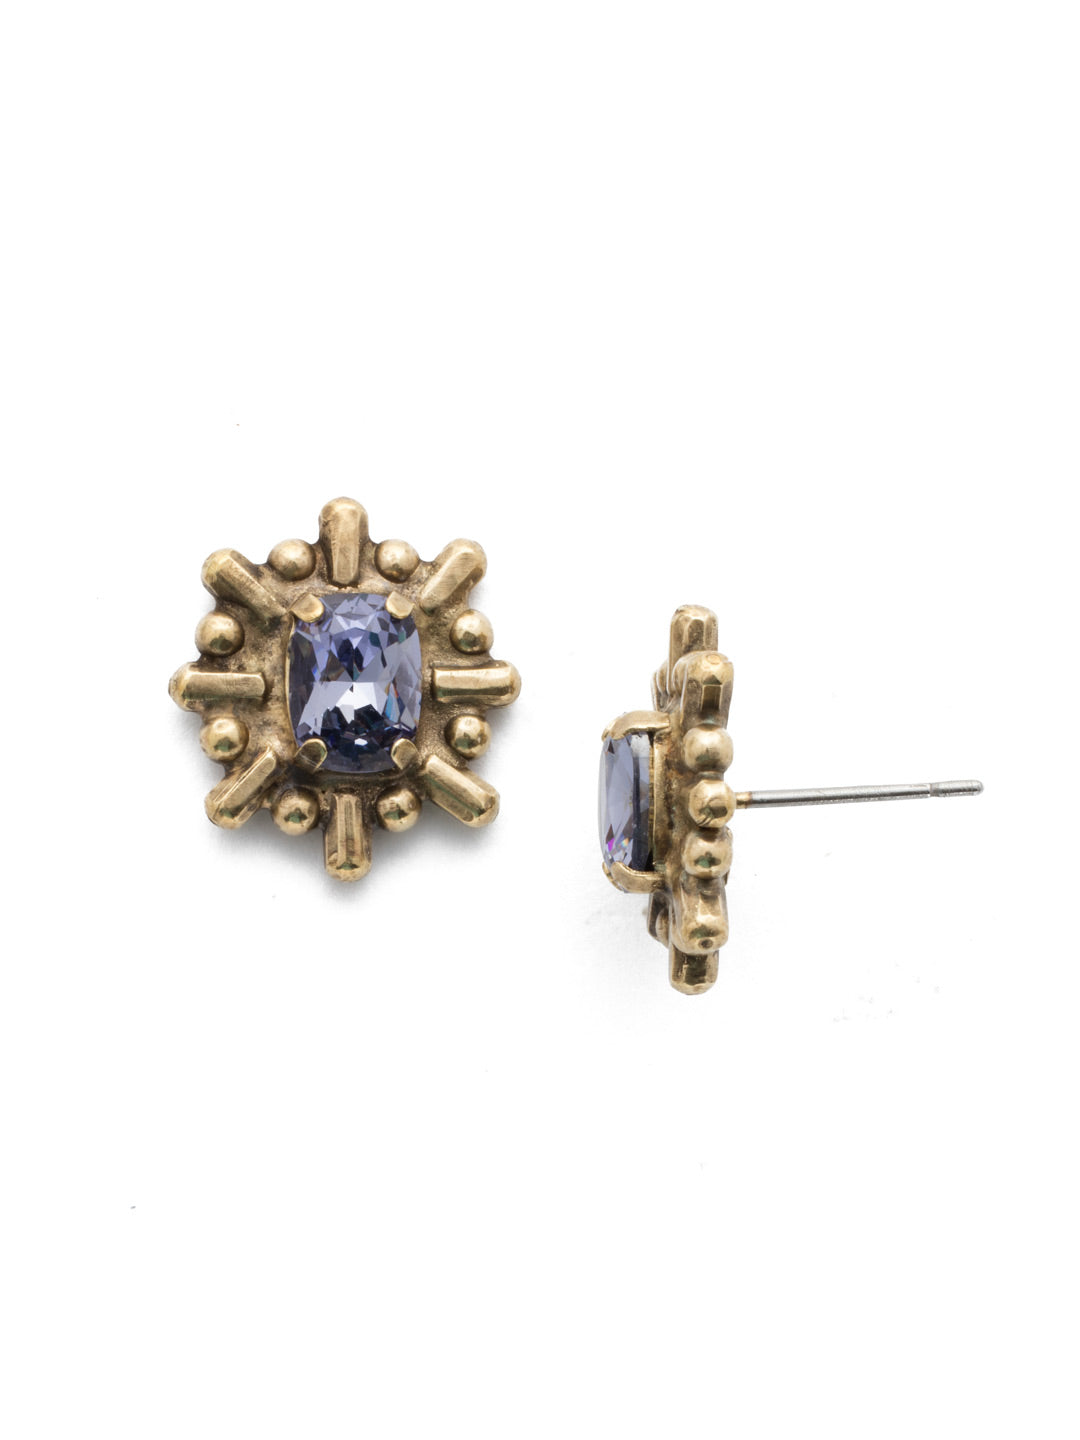 Stella Stud Earring - EEF59AGGOT - Sometimes the little things make all the difference.Turning a casual or dressy look into something radiant. From Sorrelli's Game of Jewel Tones collection in our Antique Gold-tone finish.